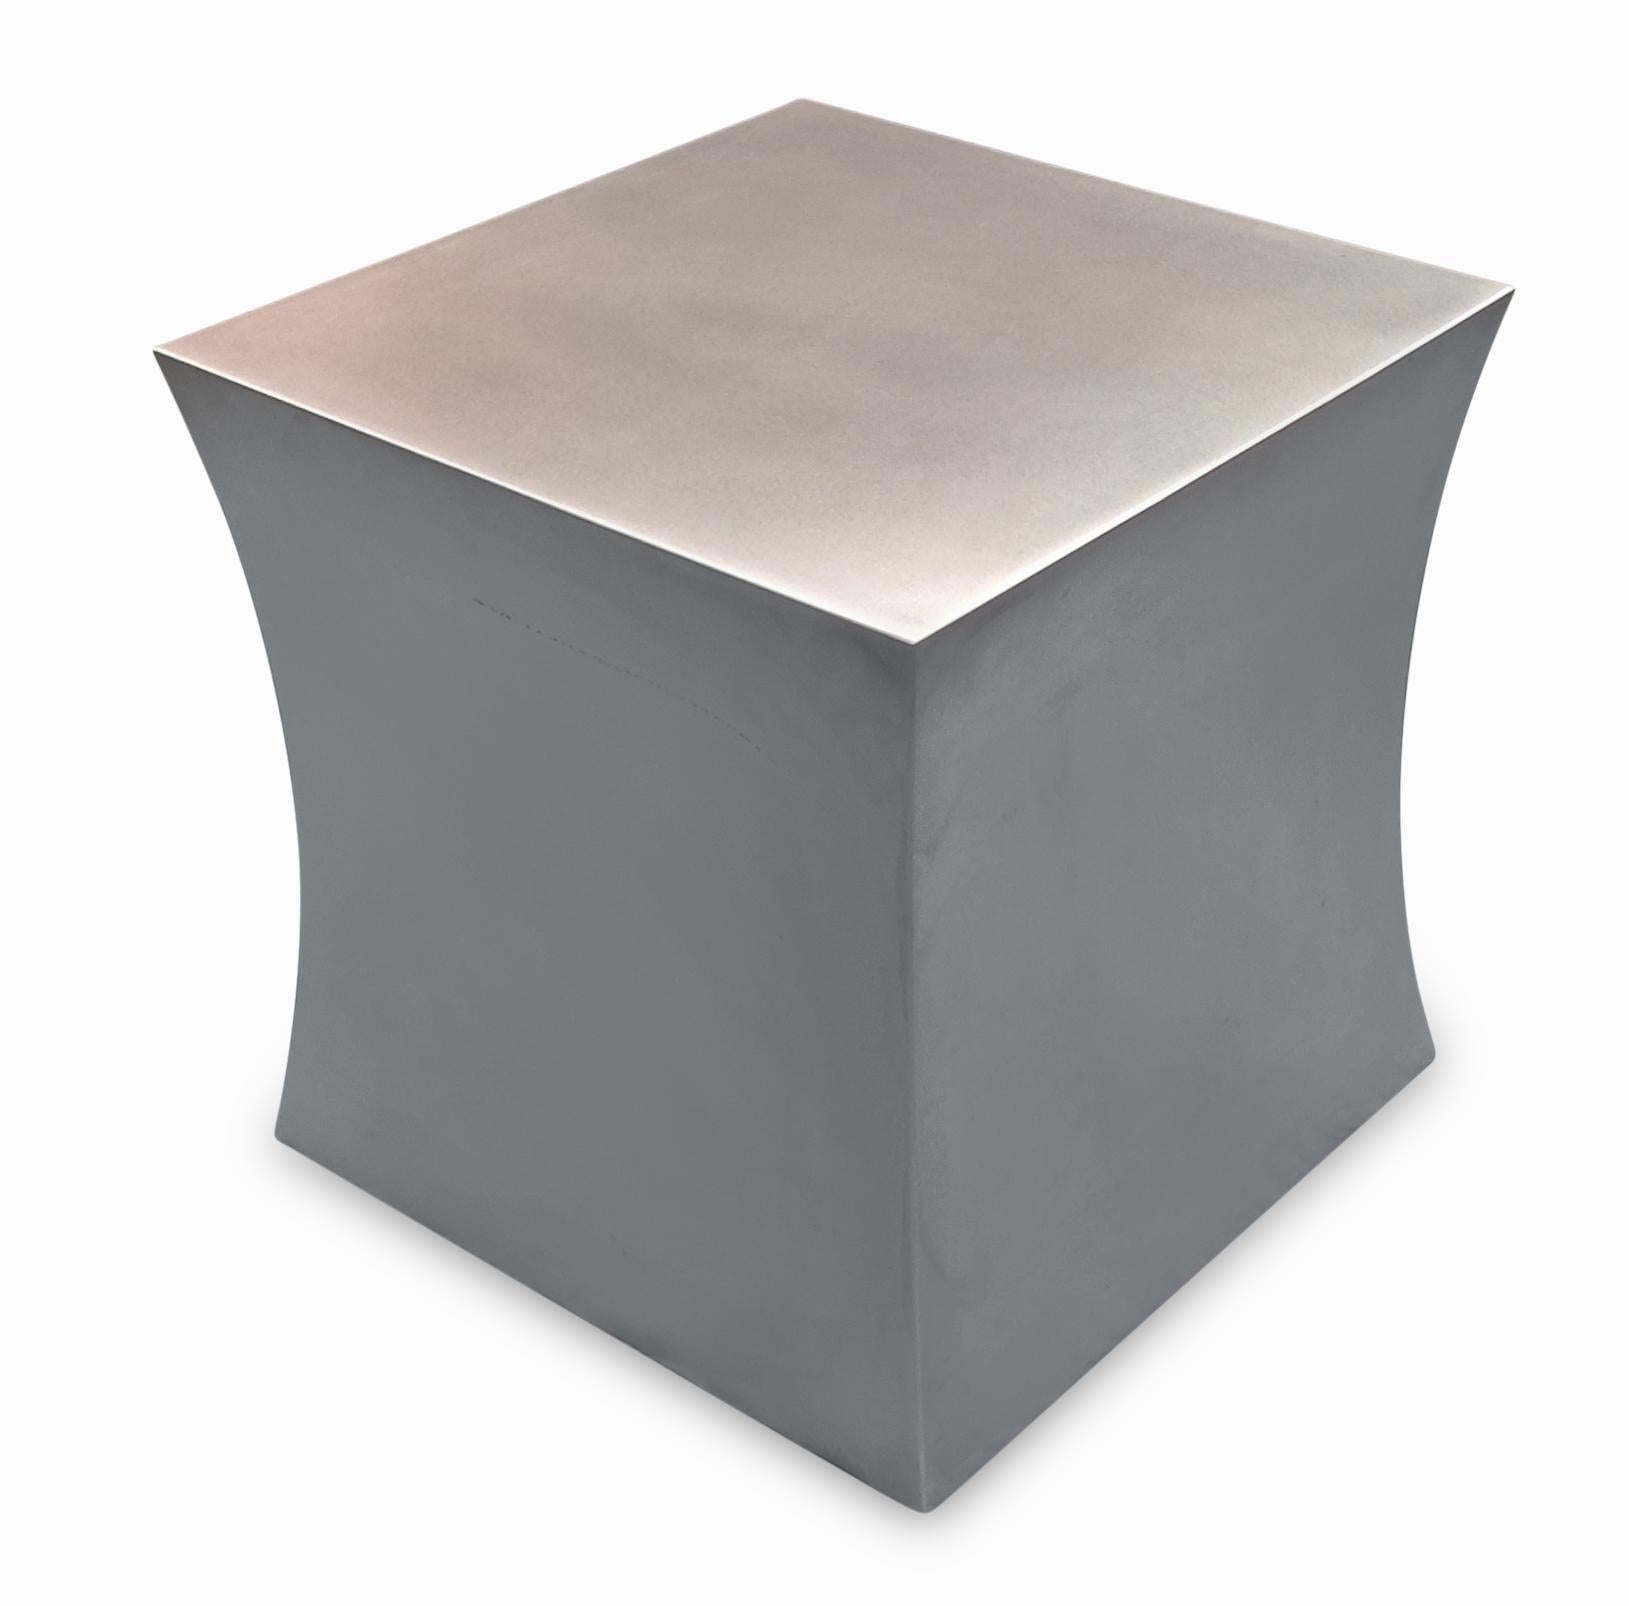 Post-Modern Chris Lehrecke Ralph Pucci Stainless Steel Concave Pedestal Side Table or Stool